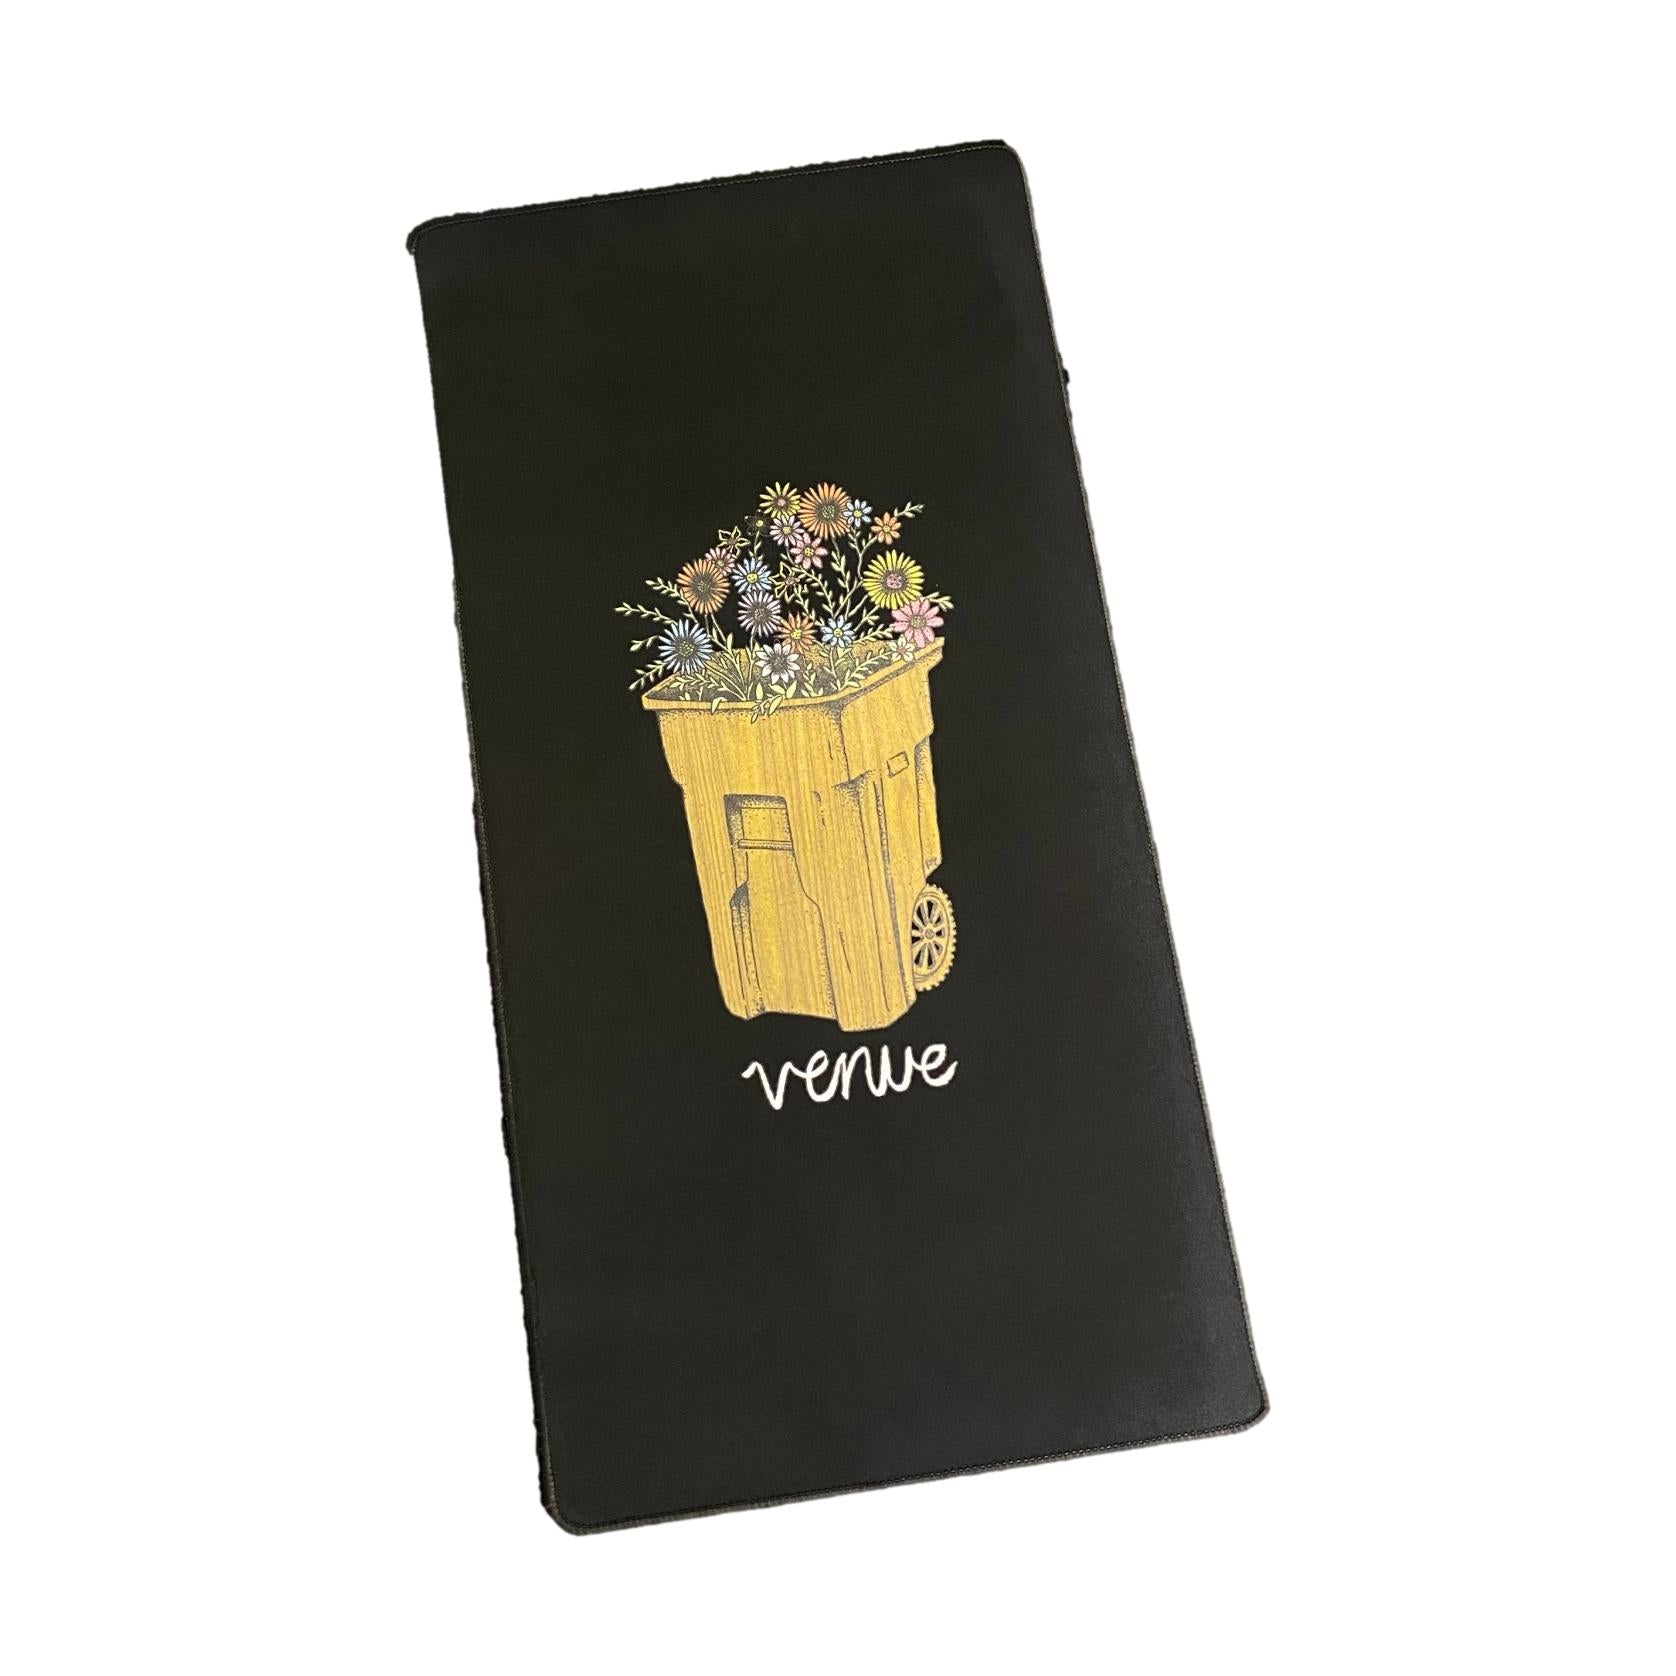 Venue Large Trash Can Gaming Mouse Pad - Venue Skateboards